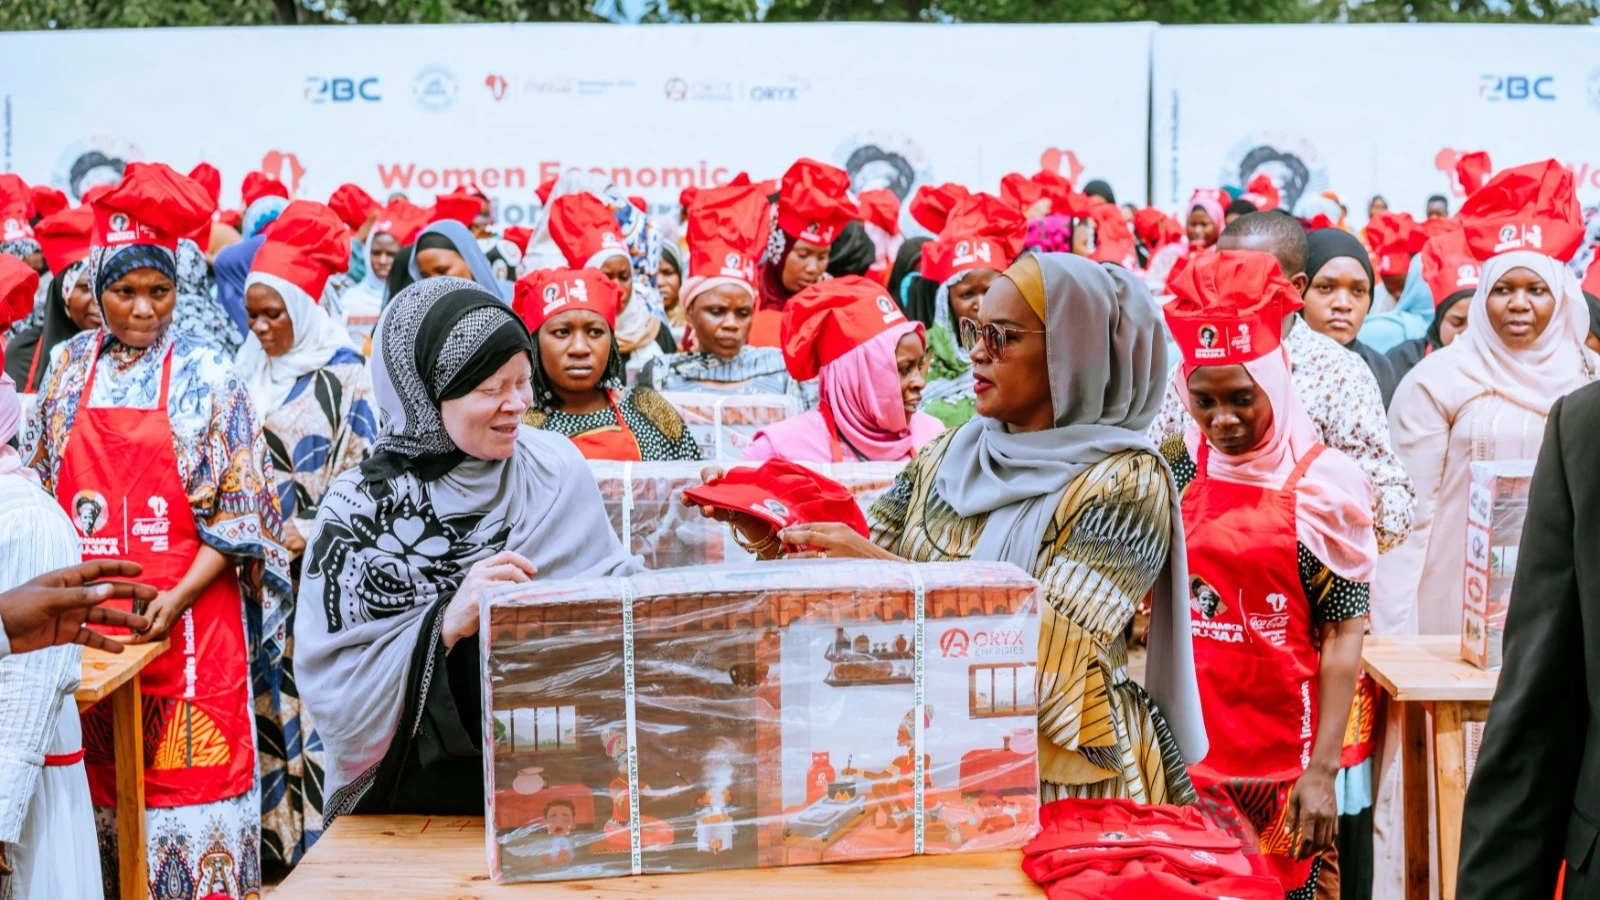 Zanzibar First Lady Mariam Mwinyi hands over a gas stove to one of Women food vendors who are commonly referred as Mama Ntilie Sauda Khamis during an economic inclusion programme called Mwanamke Shujaa which is a partnership between Coca-Cola Kwanza.